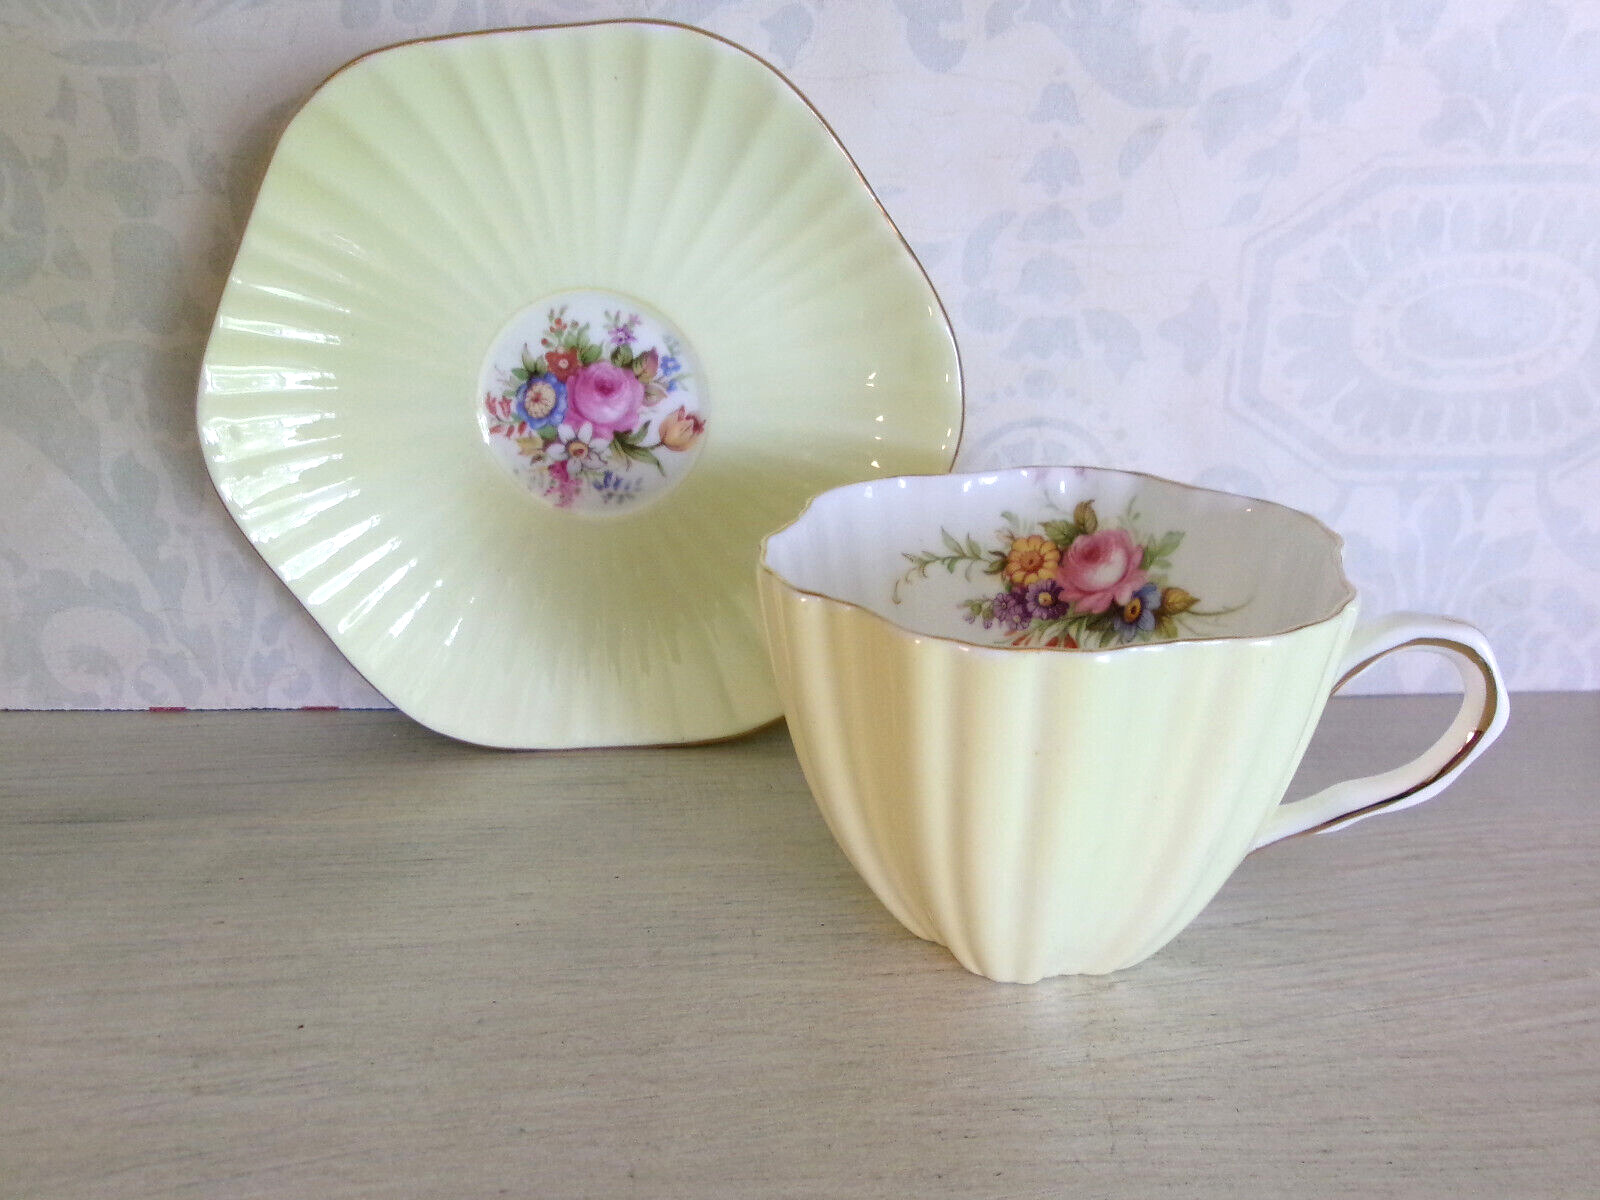 EB FOLEY Pale Yellow Cup & Saucer Flower Pattern Bone China England #1850 Teacup